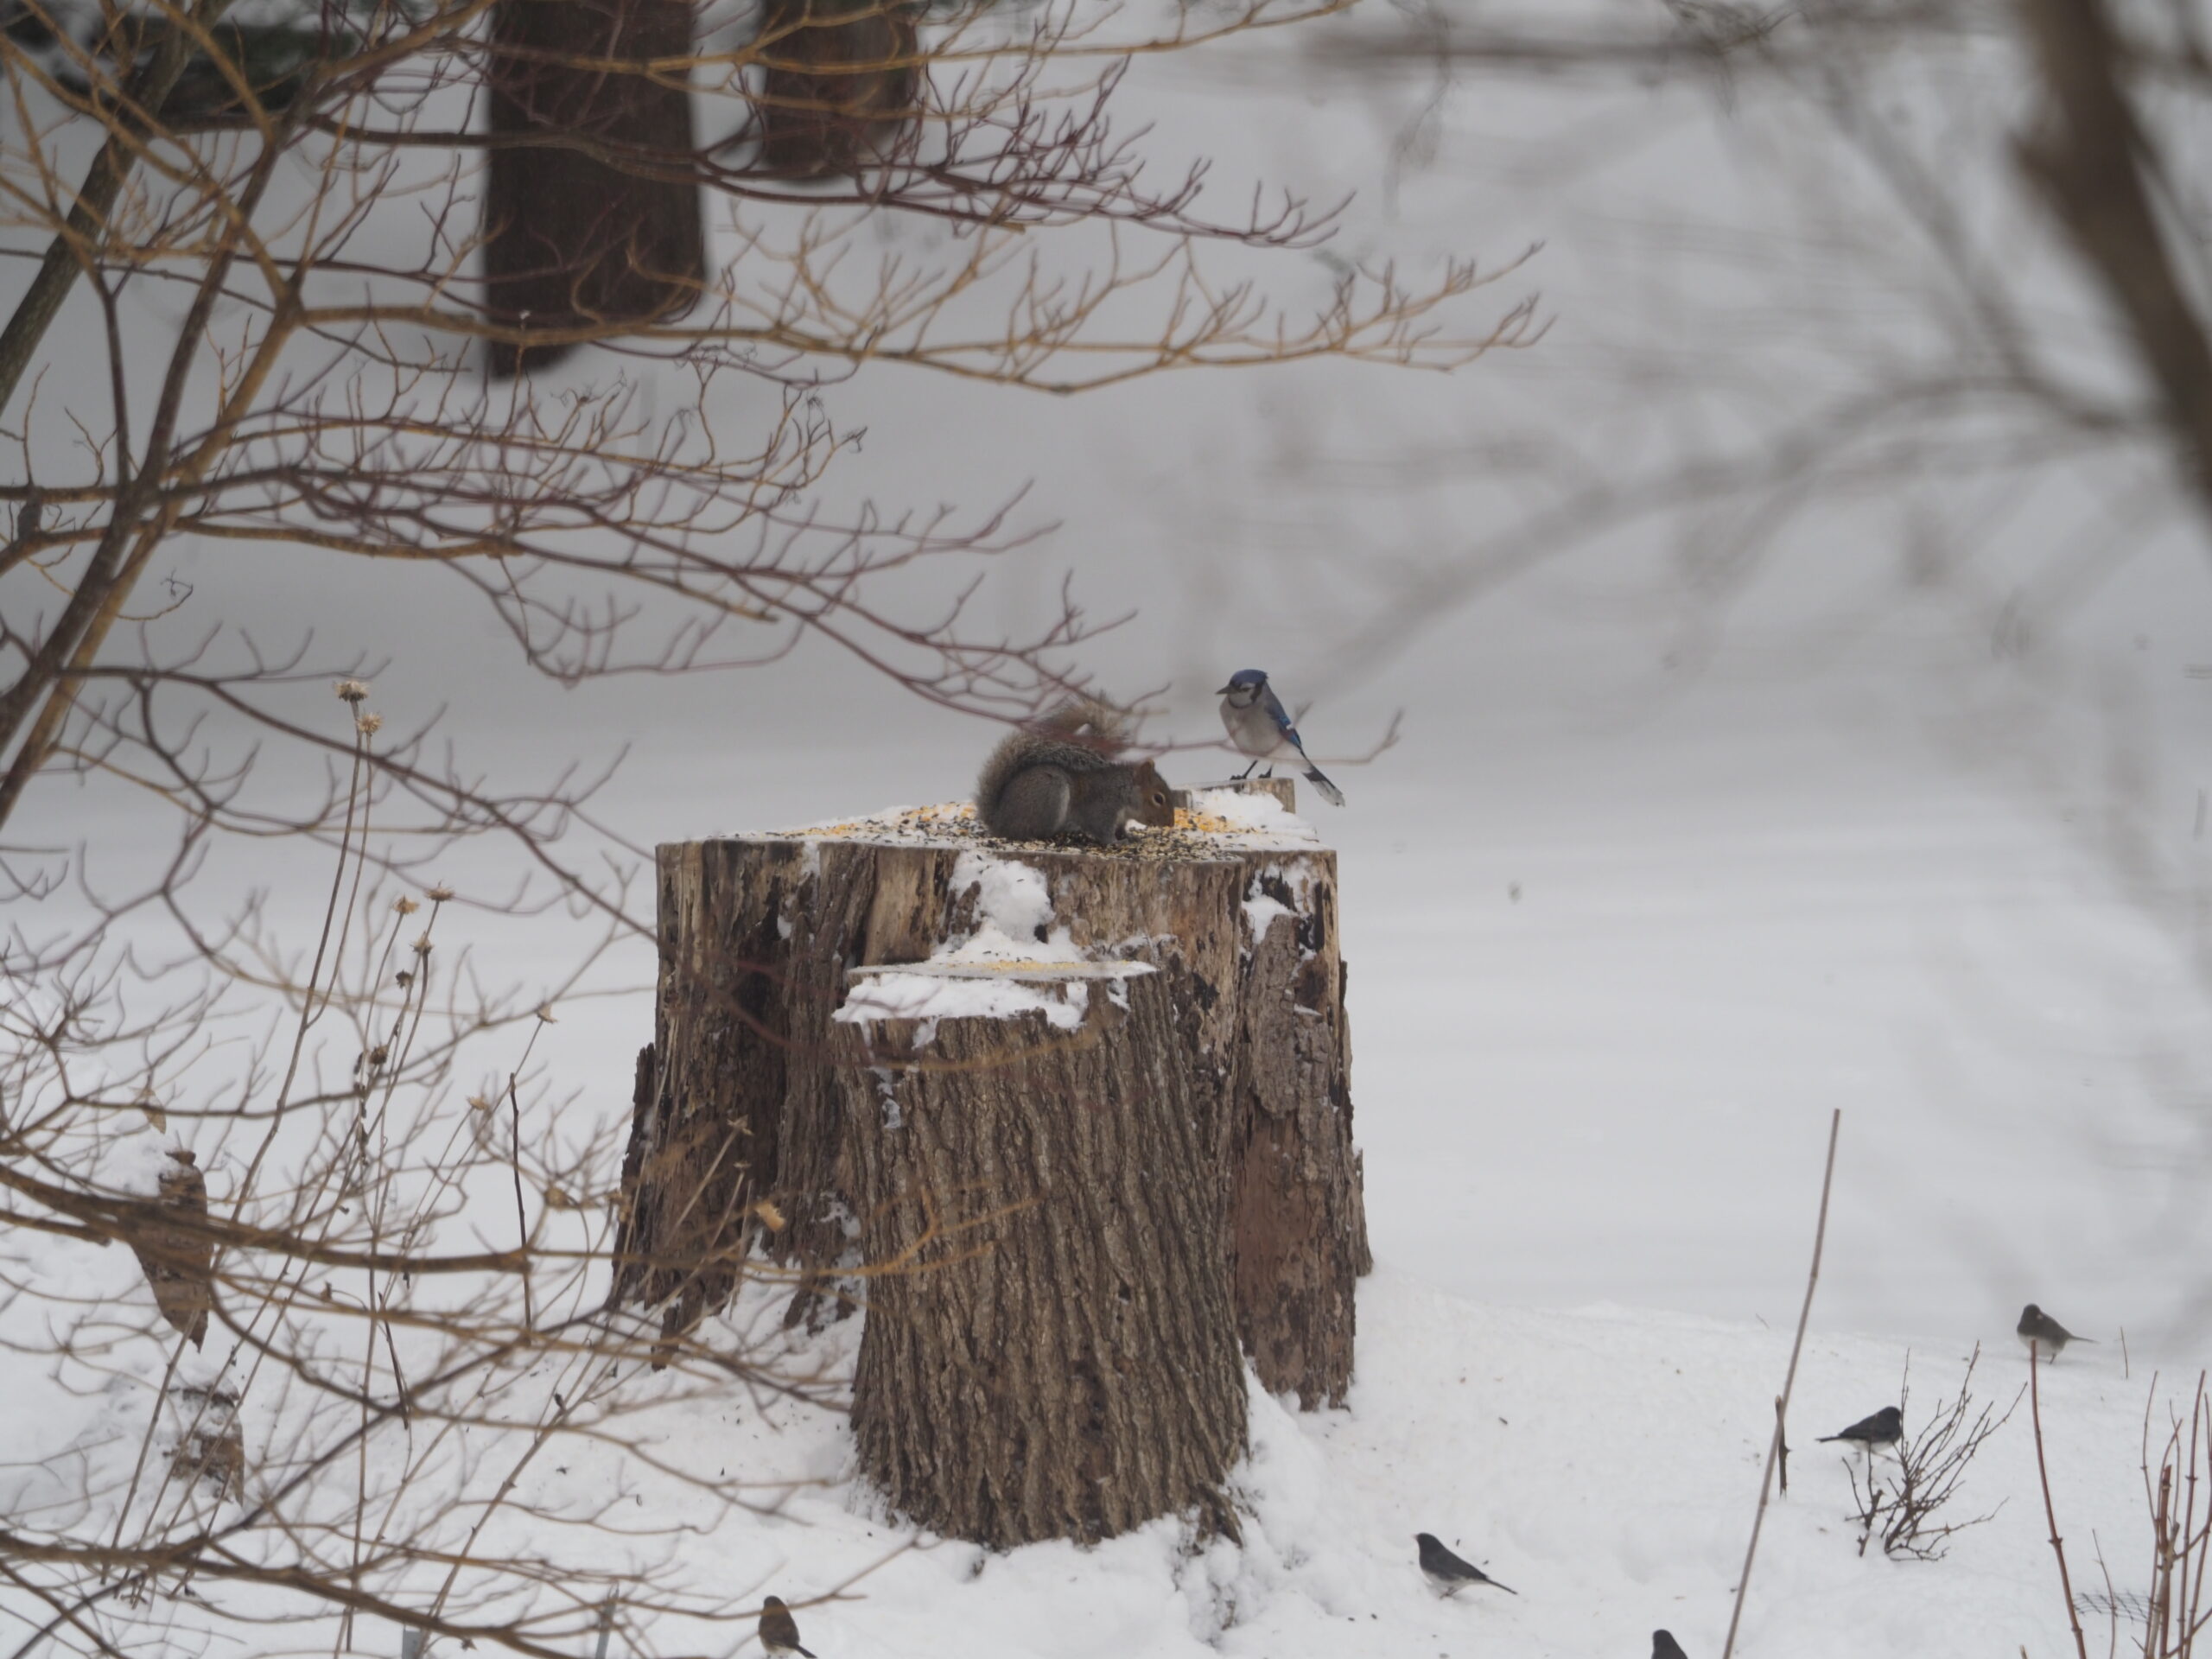 A blue jay waits impatiently a few feet from the stump while a grey squirrel sifts through the day's seed offerings for instant and longer-range gratification. ANDREW MESSINGER